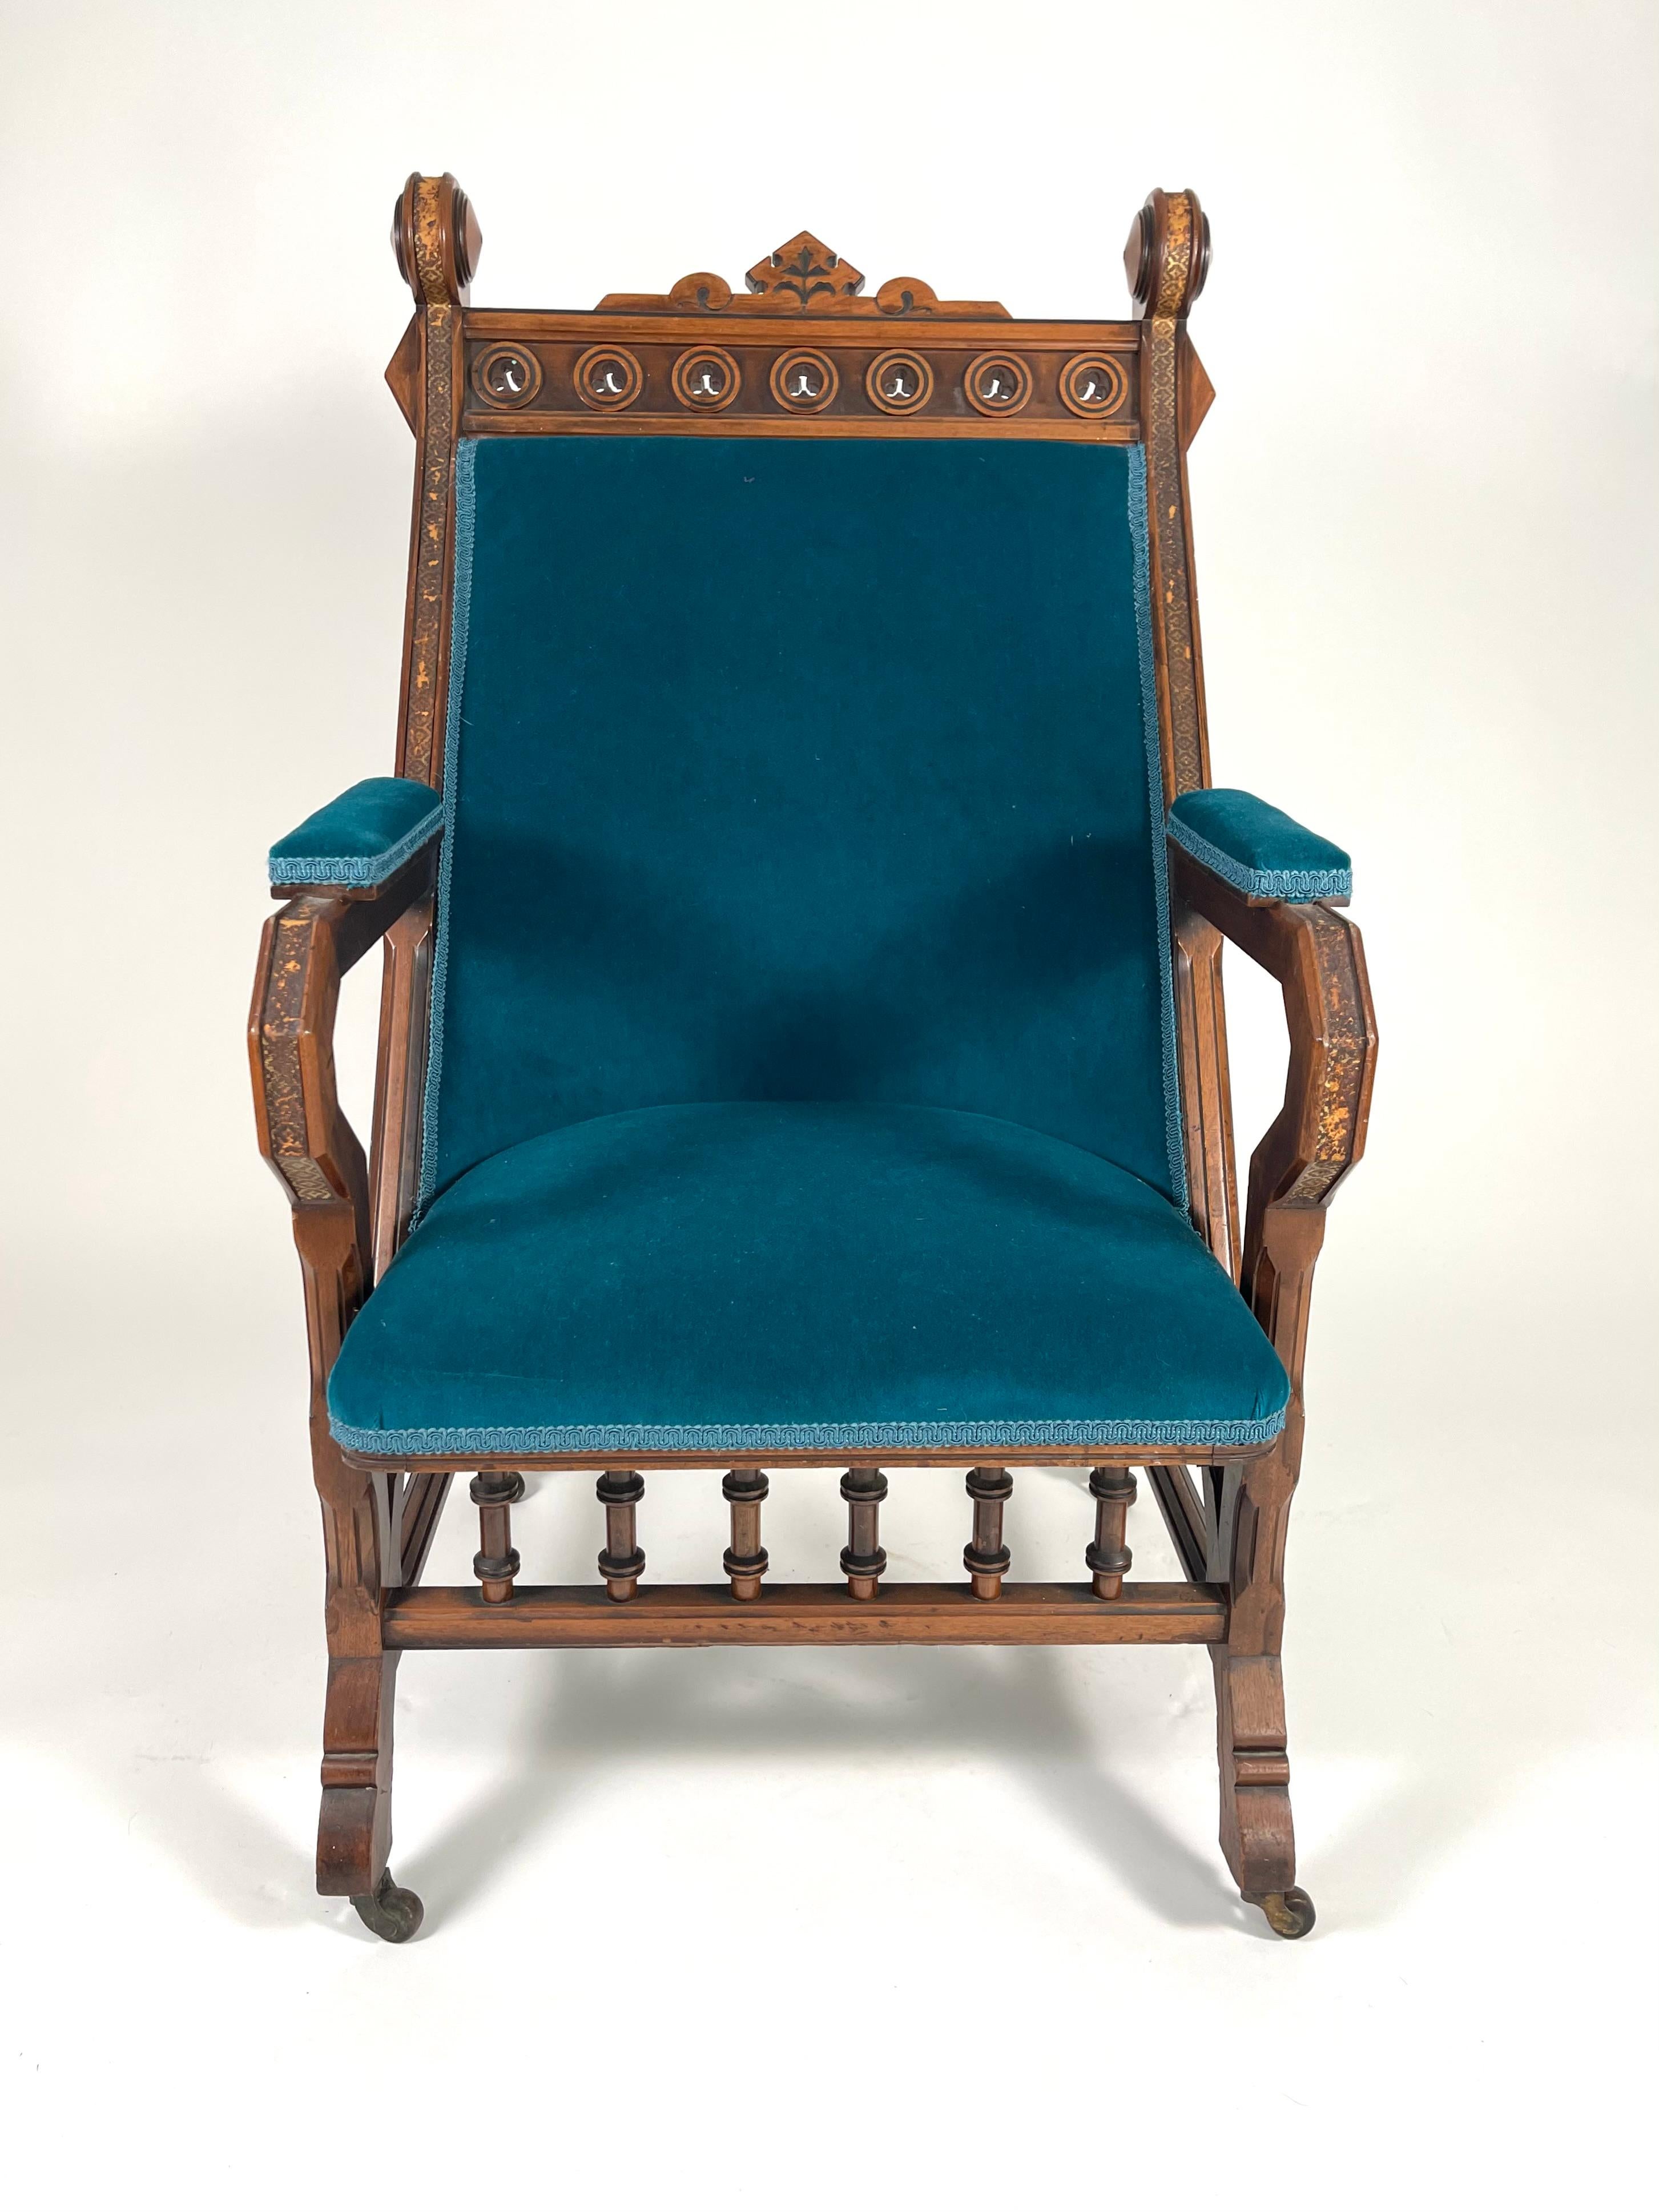 A 19th century Gothic Revival armchair in carved walnut upholstered in Holland and Sherry turquoise velvet. Inspired both by Japanese design and English gothic ornament, The crest rail is decorated with circles and trefoil cutouts flanked by carved